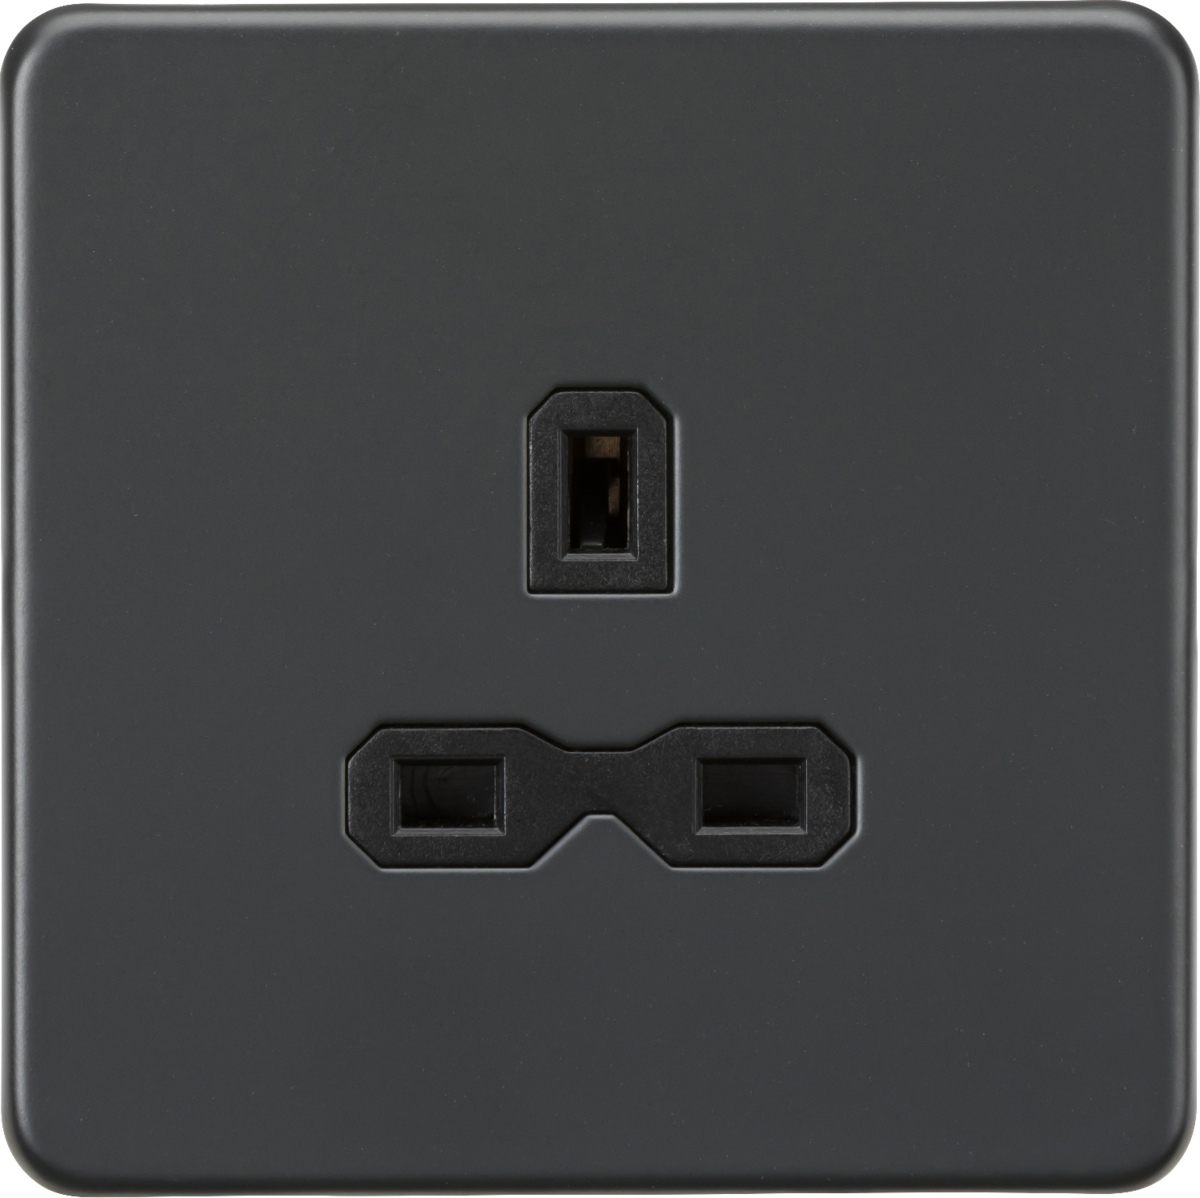 Knightsbridge 13A 1G Unswitched socket – Anthracite with black insert SFR7000UAT - West Midland Electrics | CCTV & Electrical Wholesaler